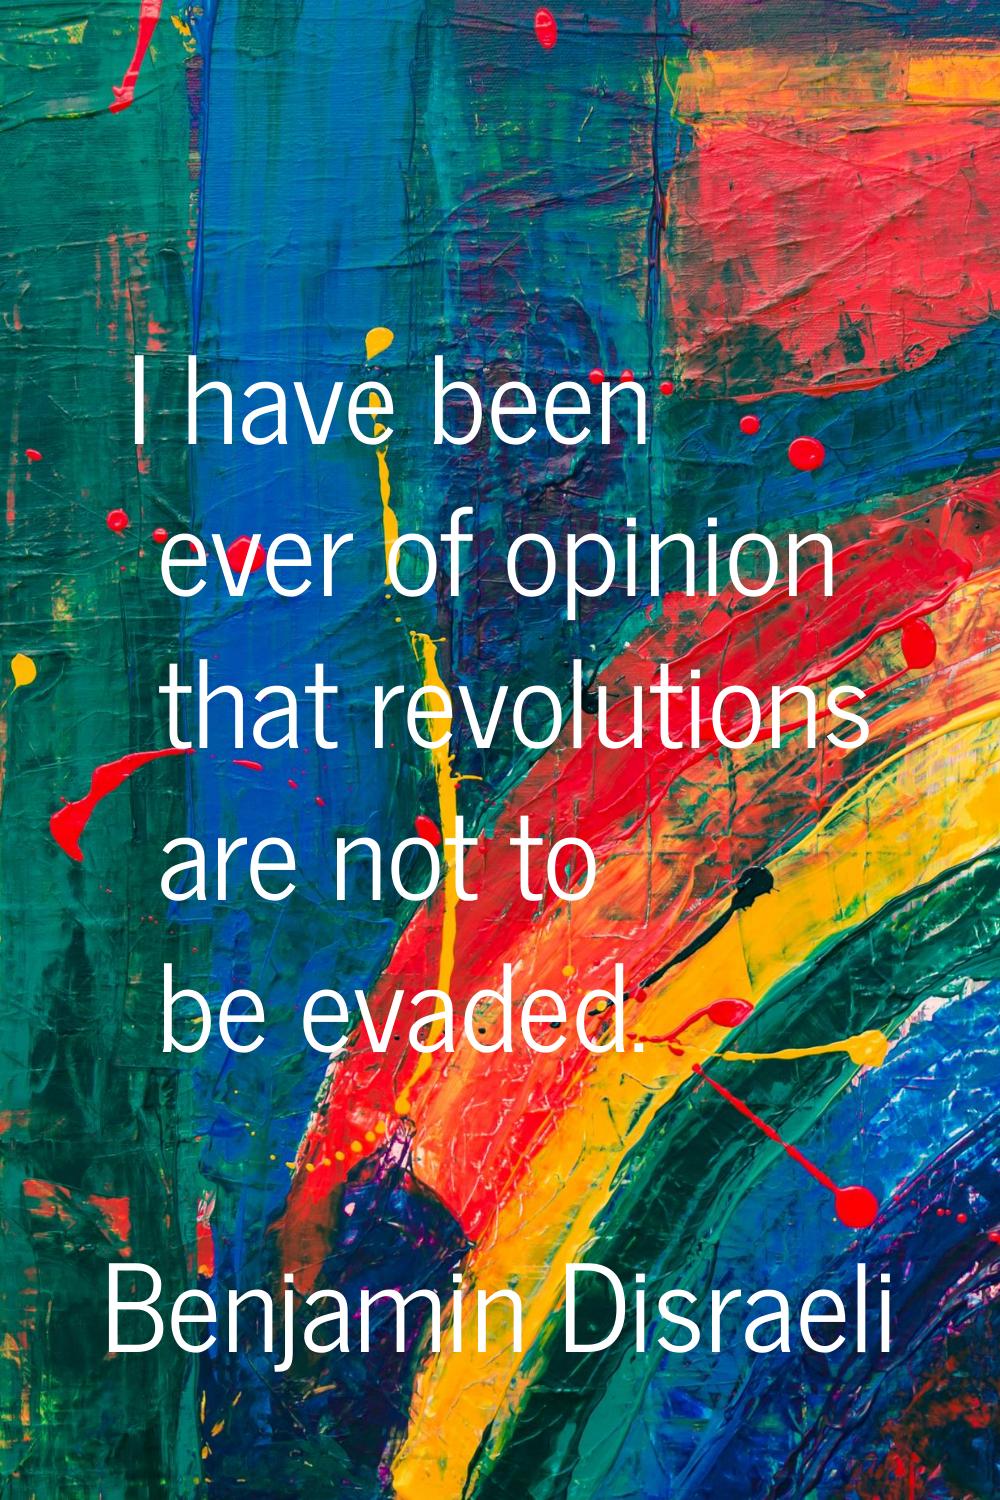 I have been ever of opinion that revolutions are not to be evaded.